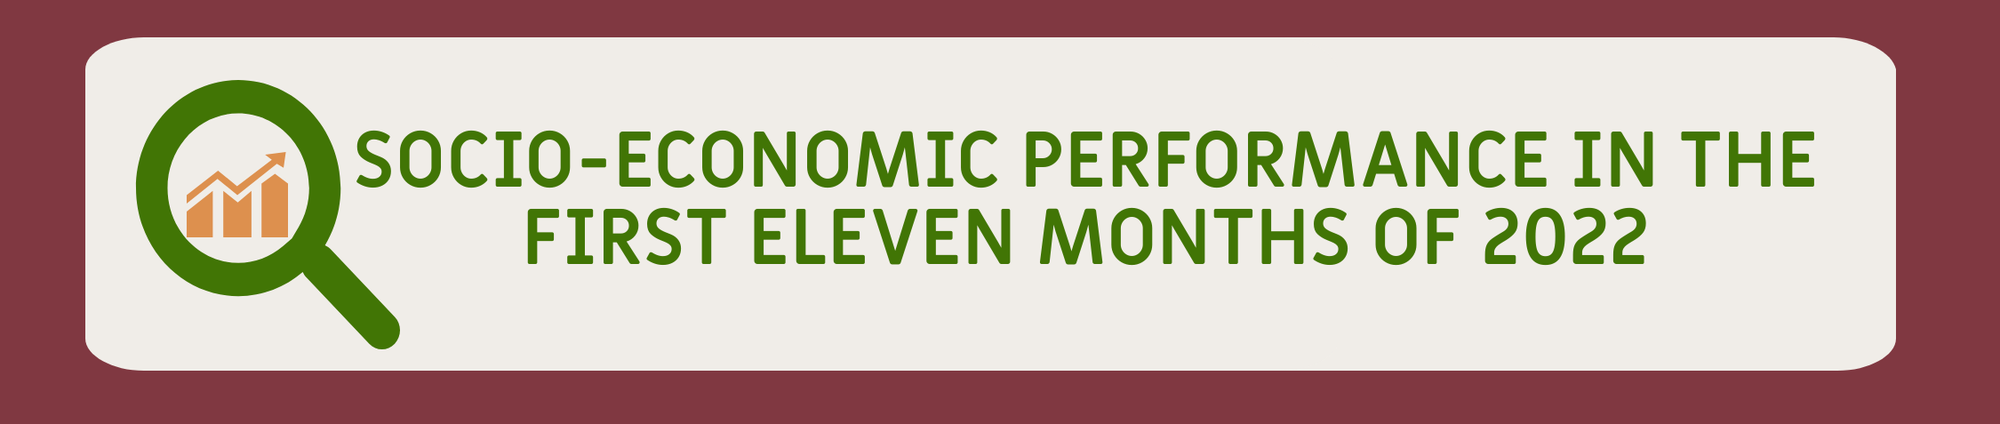 INFOGRAPHICS: SOCIO-ECONOMIC PERFORMANCE IN THE FIRST ELEVEN MONTHS OF 2022 - Ảnh 1.